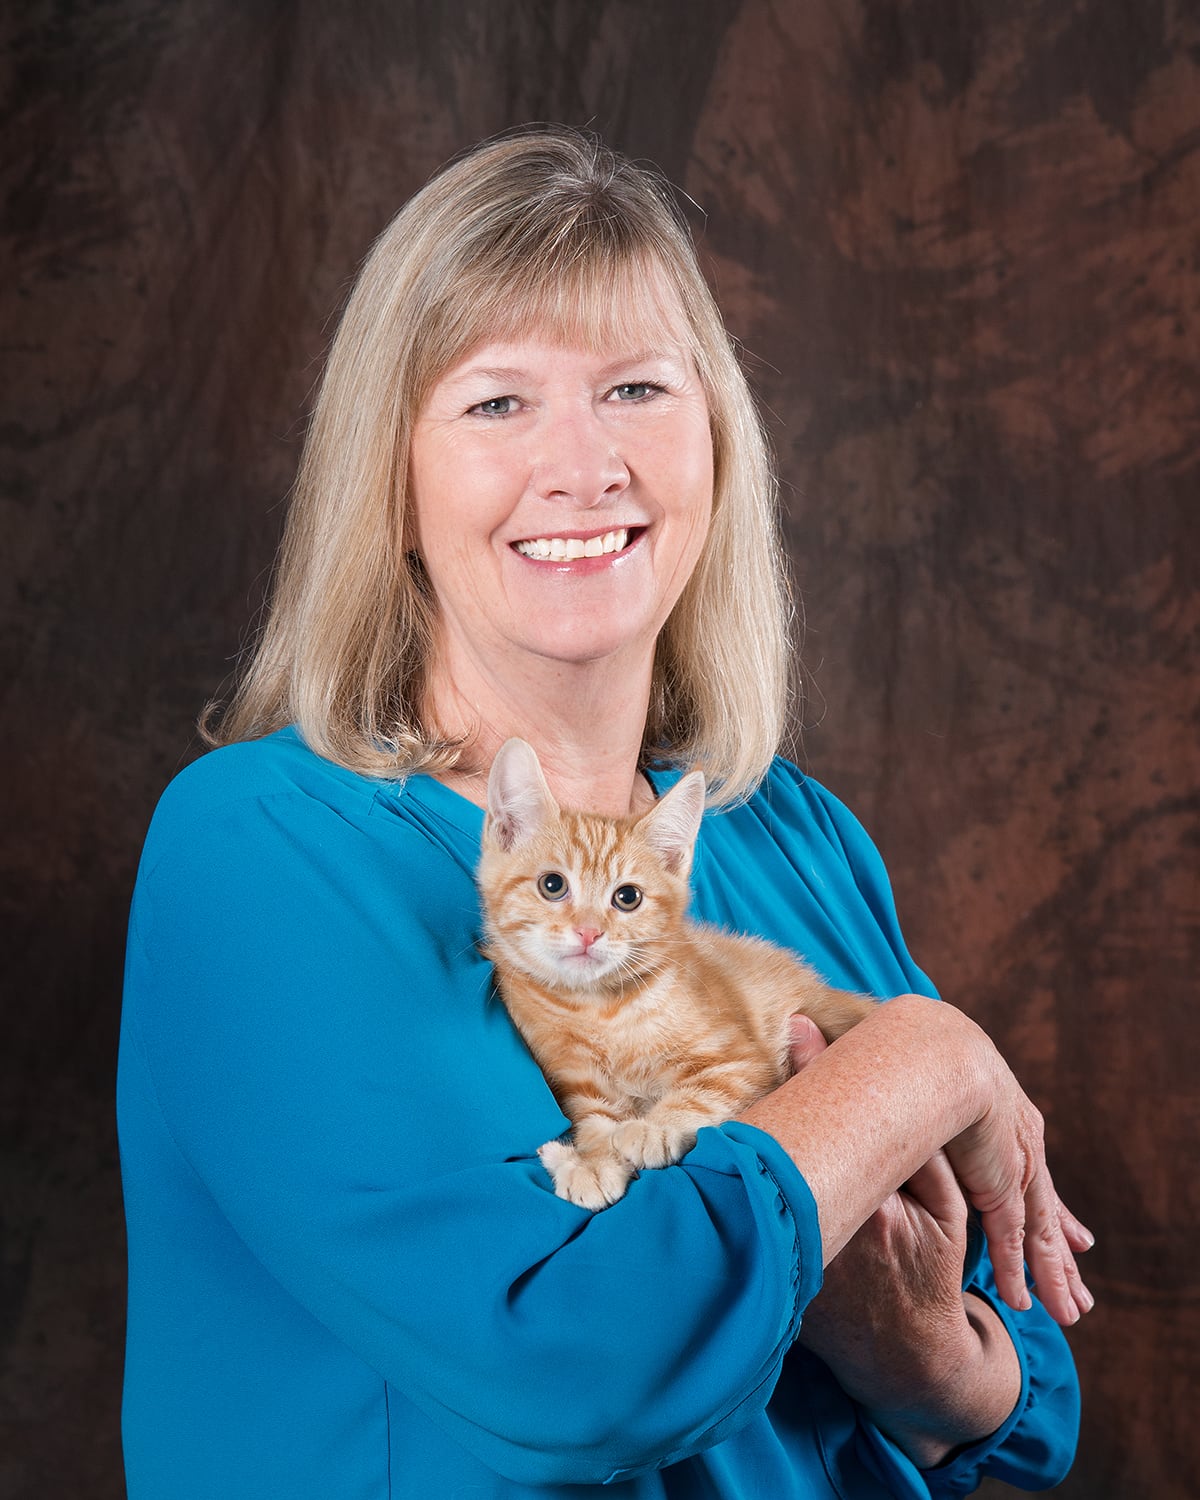 A headshot of Nancy Puro. She is smiling in a blue blouse and holding an orange kitten.